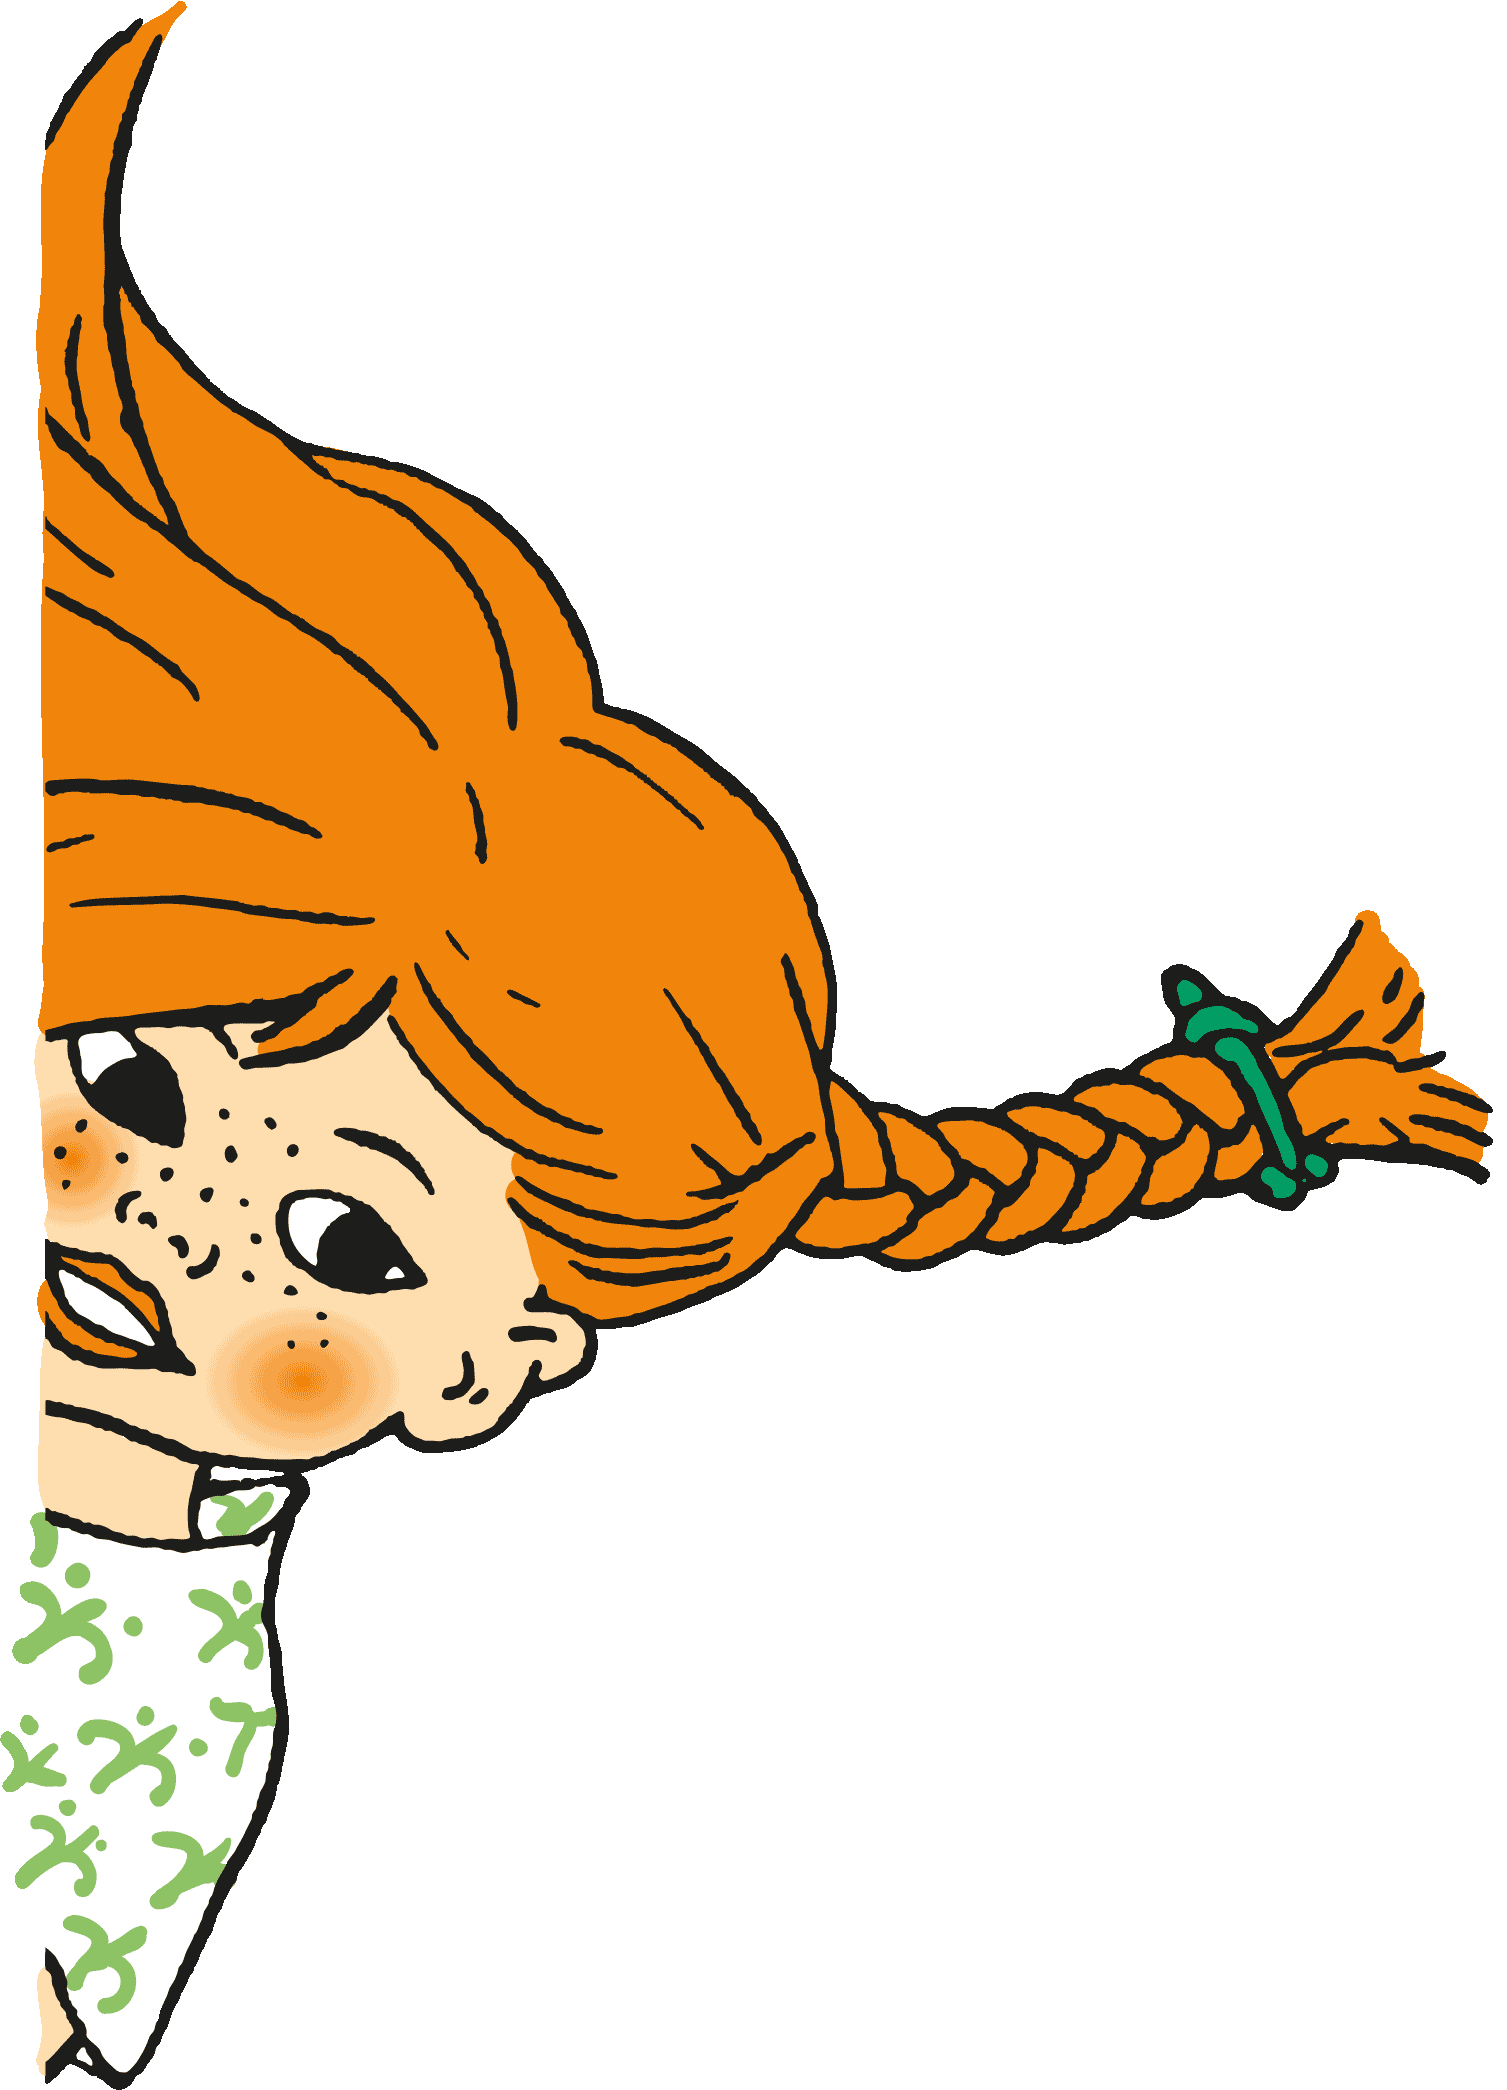 Pippi Longstocking Sticker By Astrid Lindgren Official For Ios And Android Giphy 7286